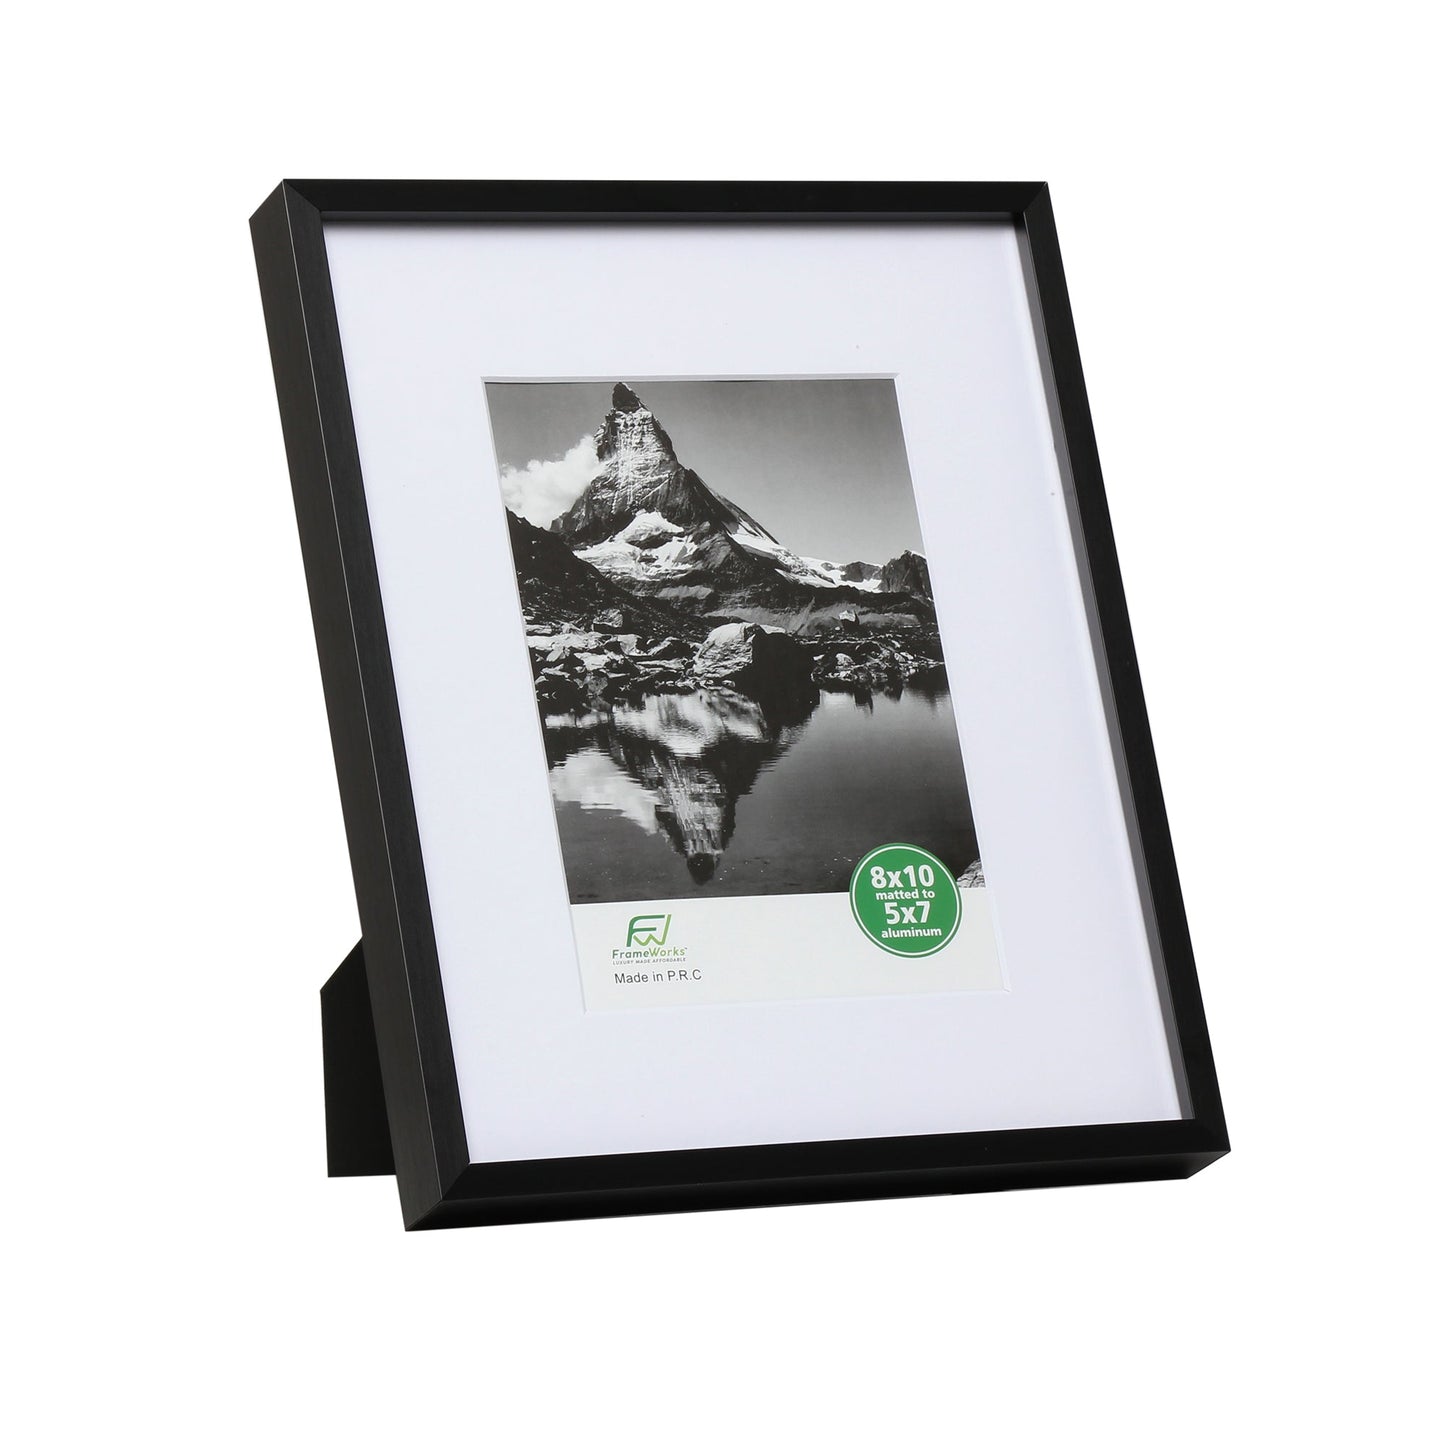 8" x 10" Deluxe Black Aluminum Contemporary Picture Frame, 5" x 7" Matted